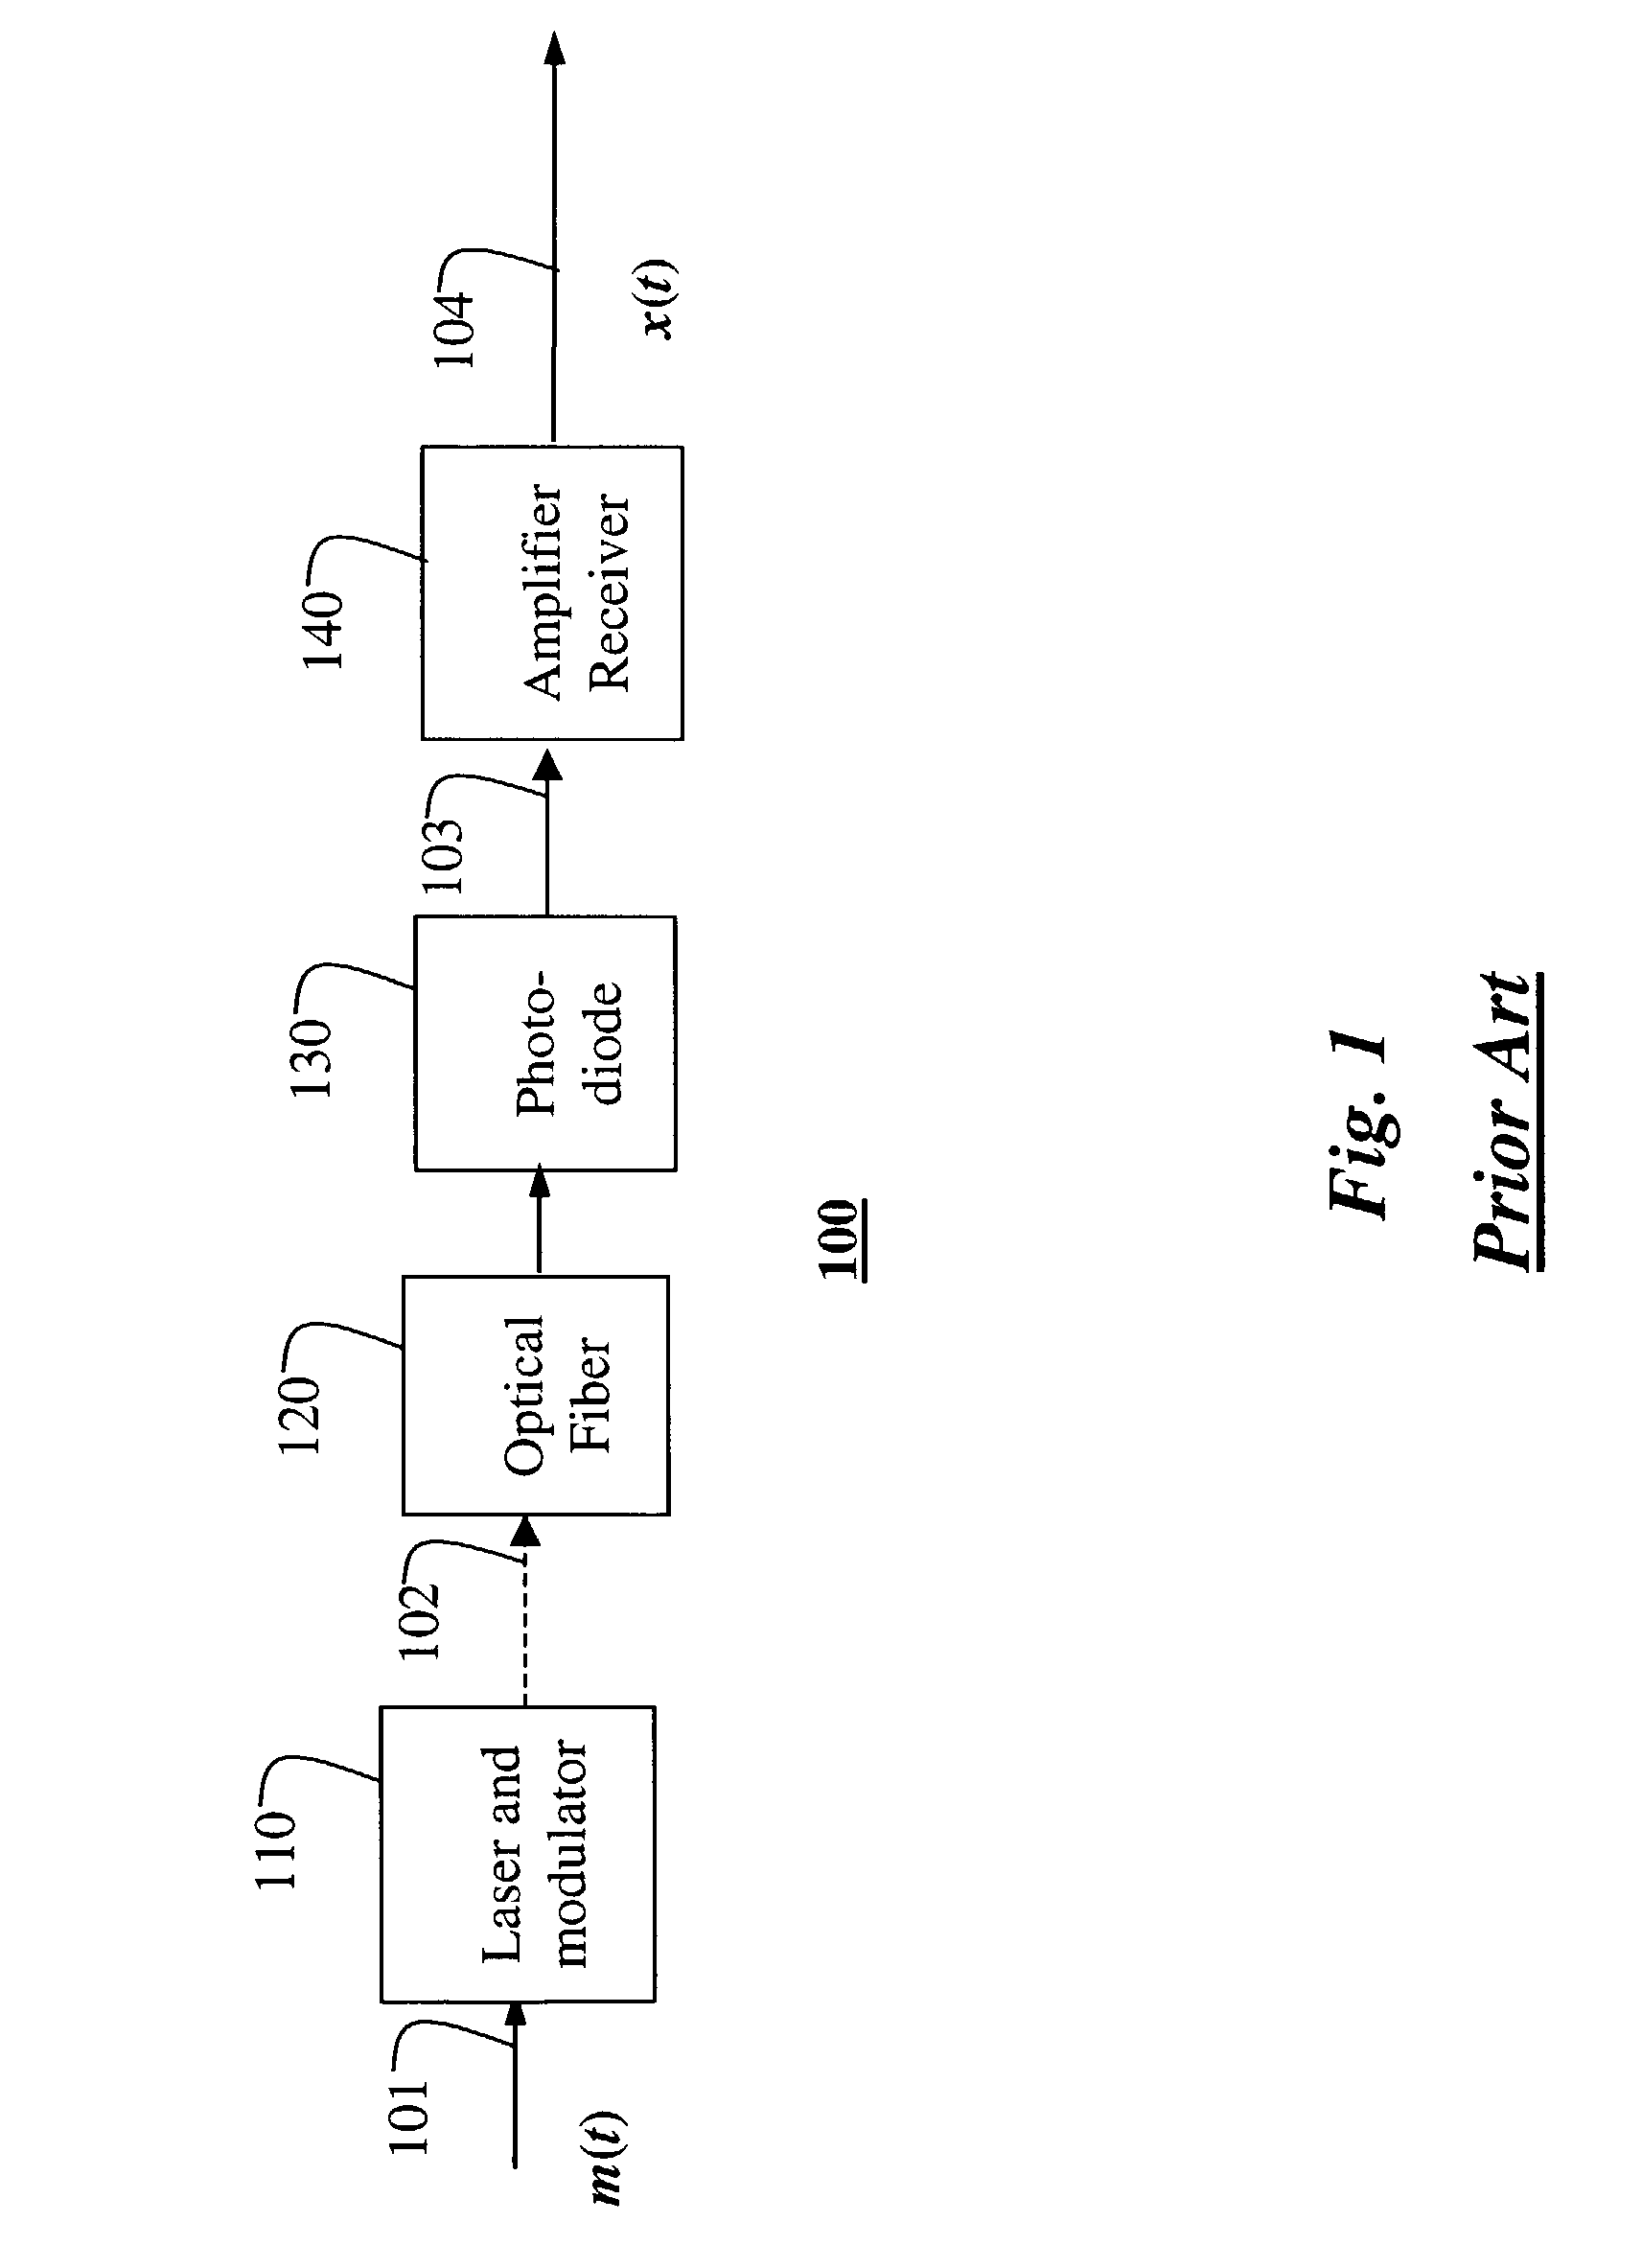 Hybrid adaptive equalizer for optical communications systems